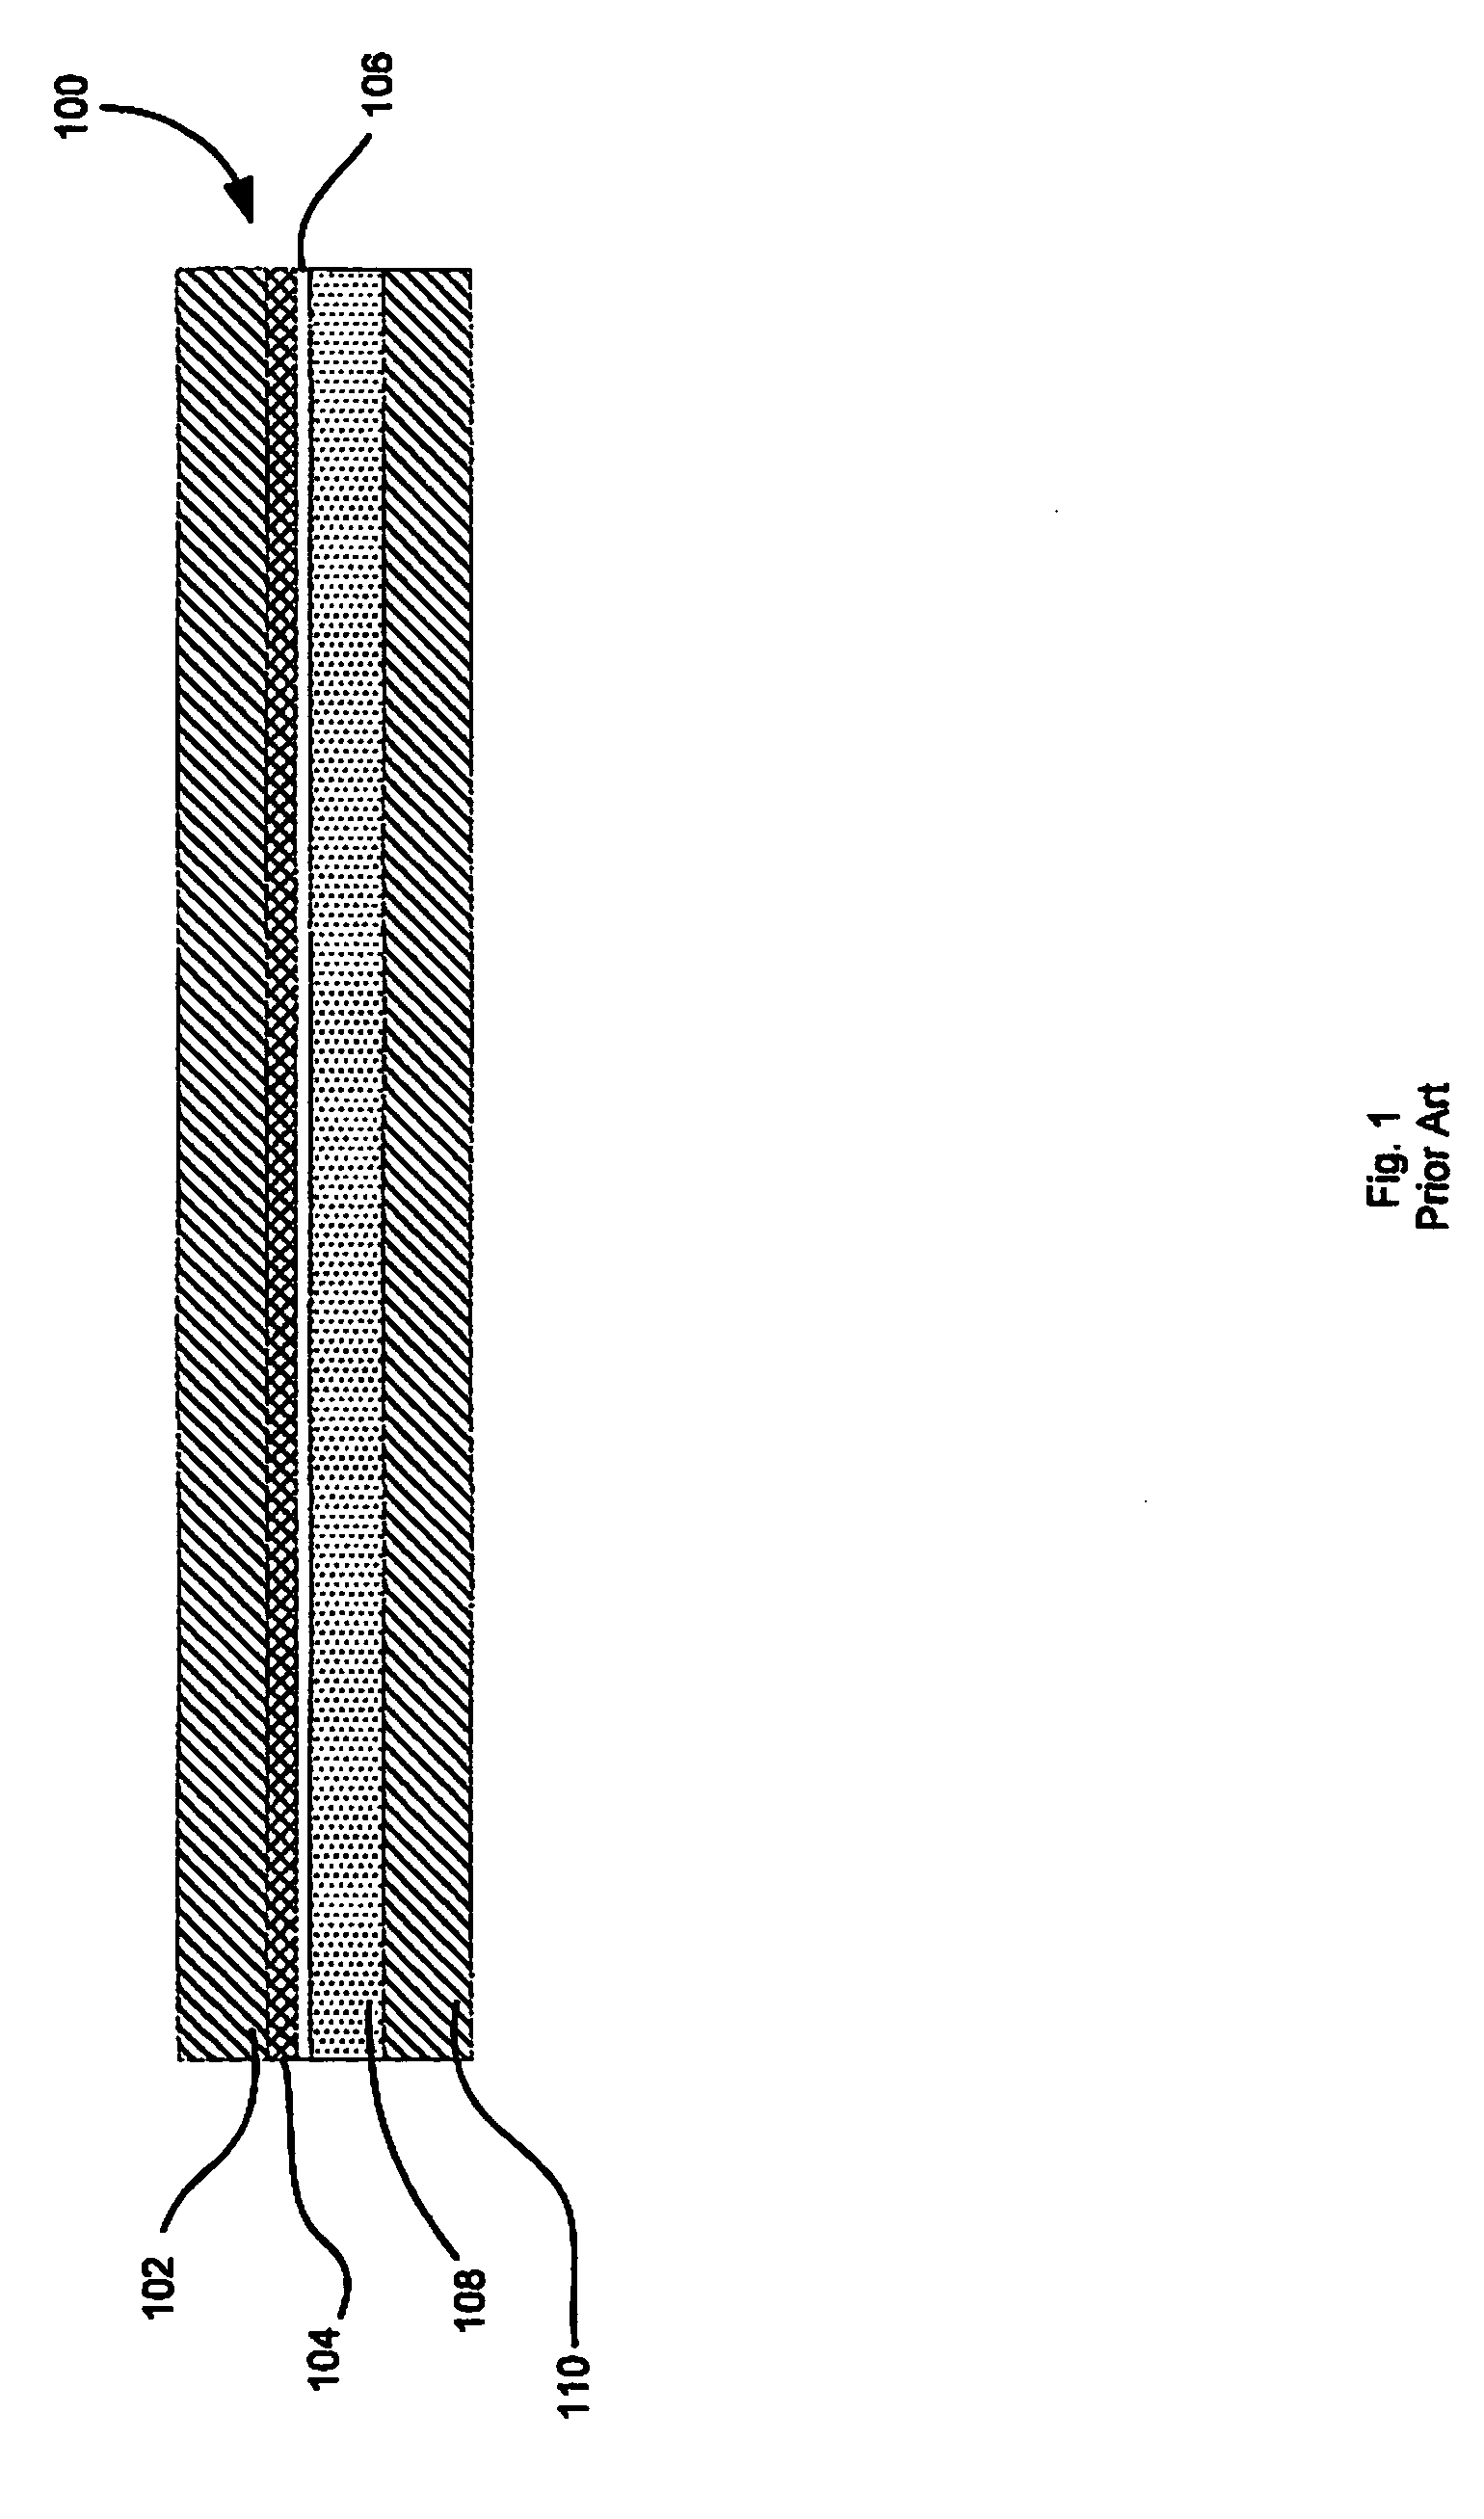 Thin film photovoltaic module having a lamination layer for enhanced reflection and photovoltaic output